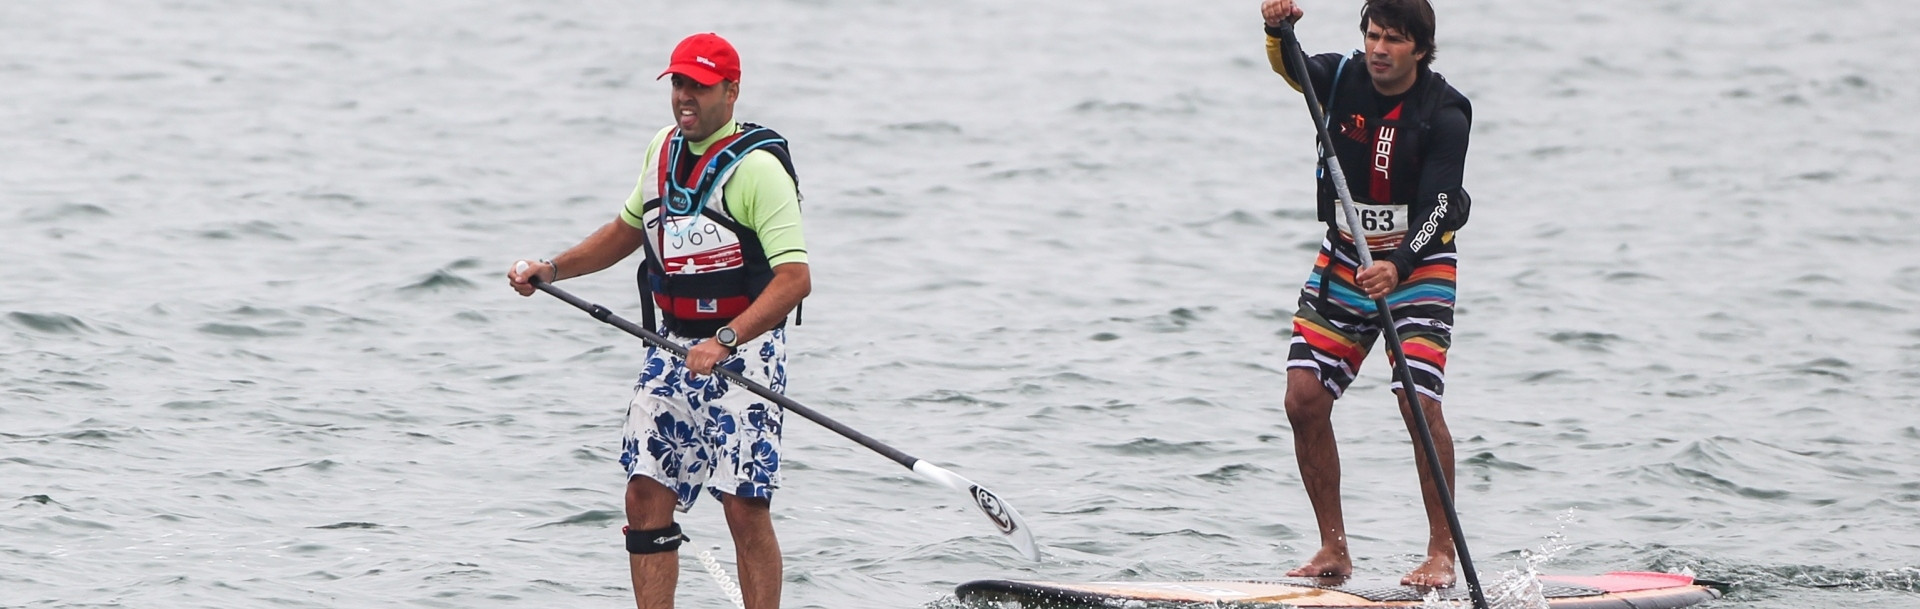 Canoeing body call for "resolution" to feud with surfing over stand-up paddle